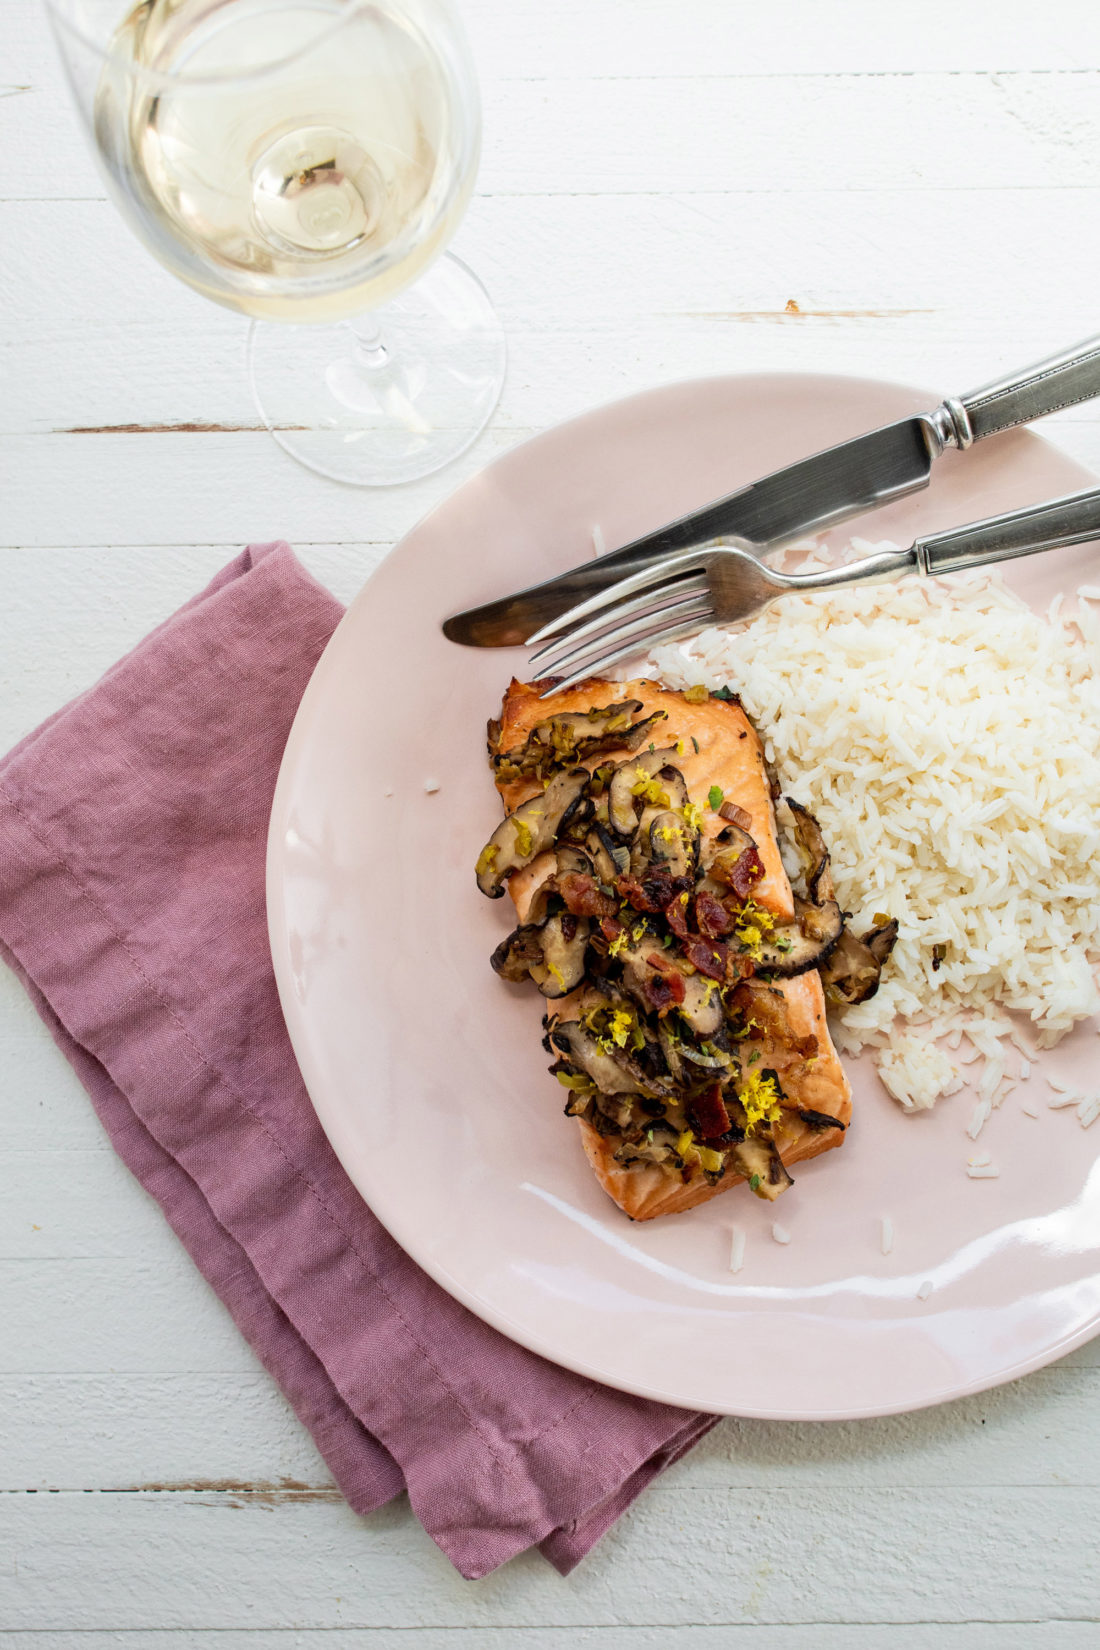 Orange Salmon with Leeks and Mushrooms on a light pink plate with rice.